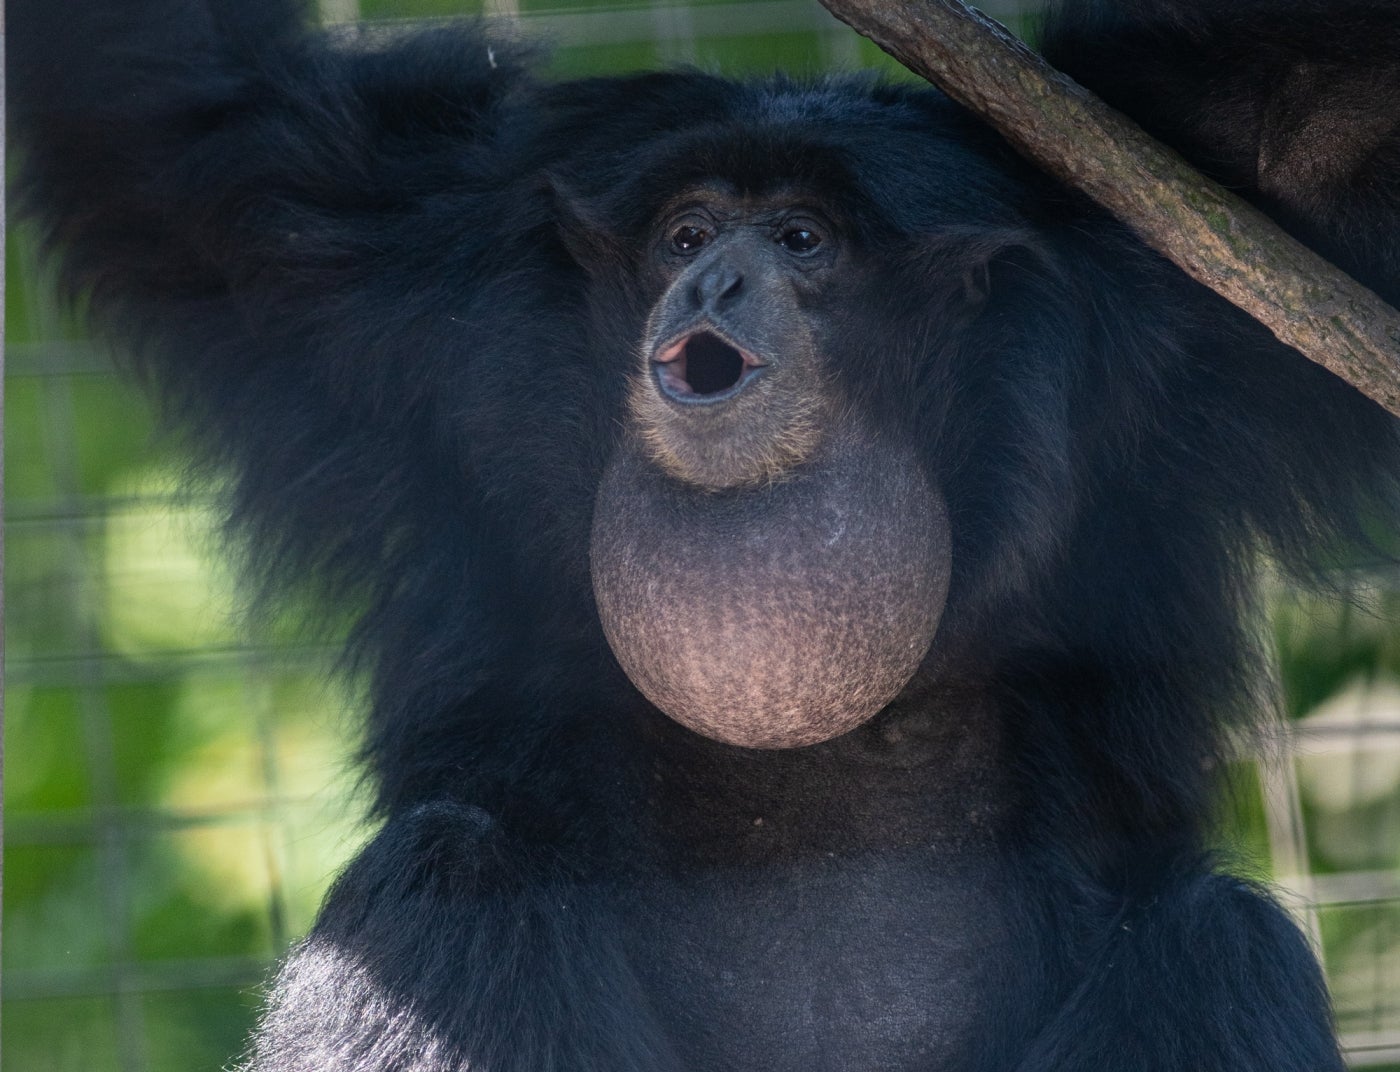 A siamang (gibbon) with thick black fur opens its mouth to make a loud call. Its throat pouch is expanded to about the size of a grapefruit to amplify its call.